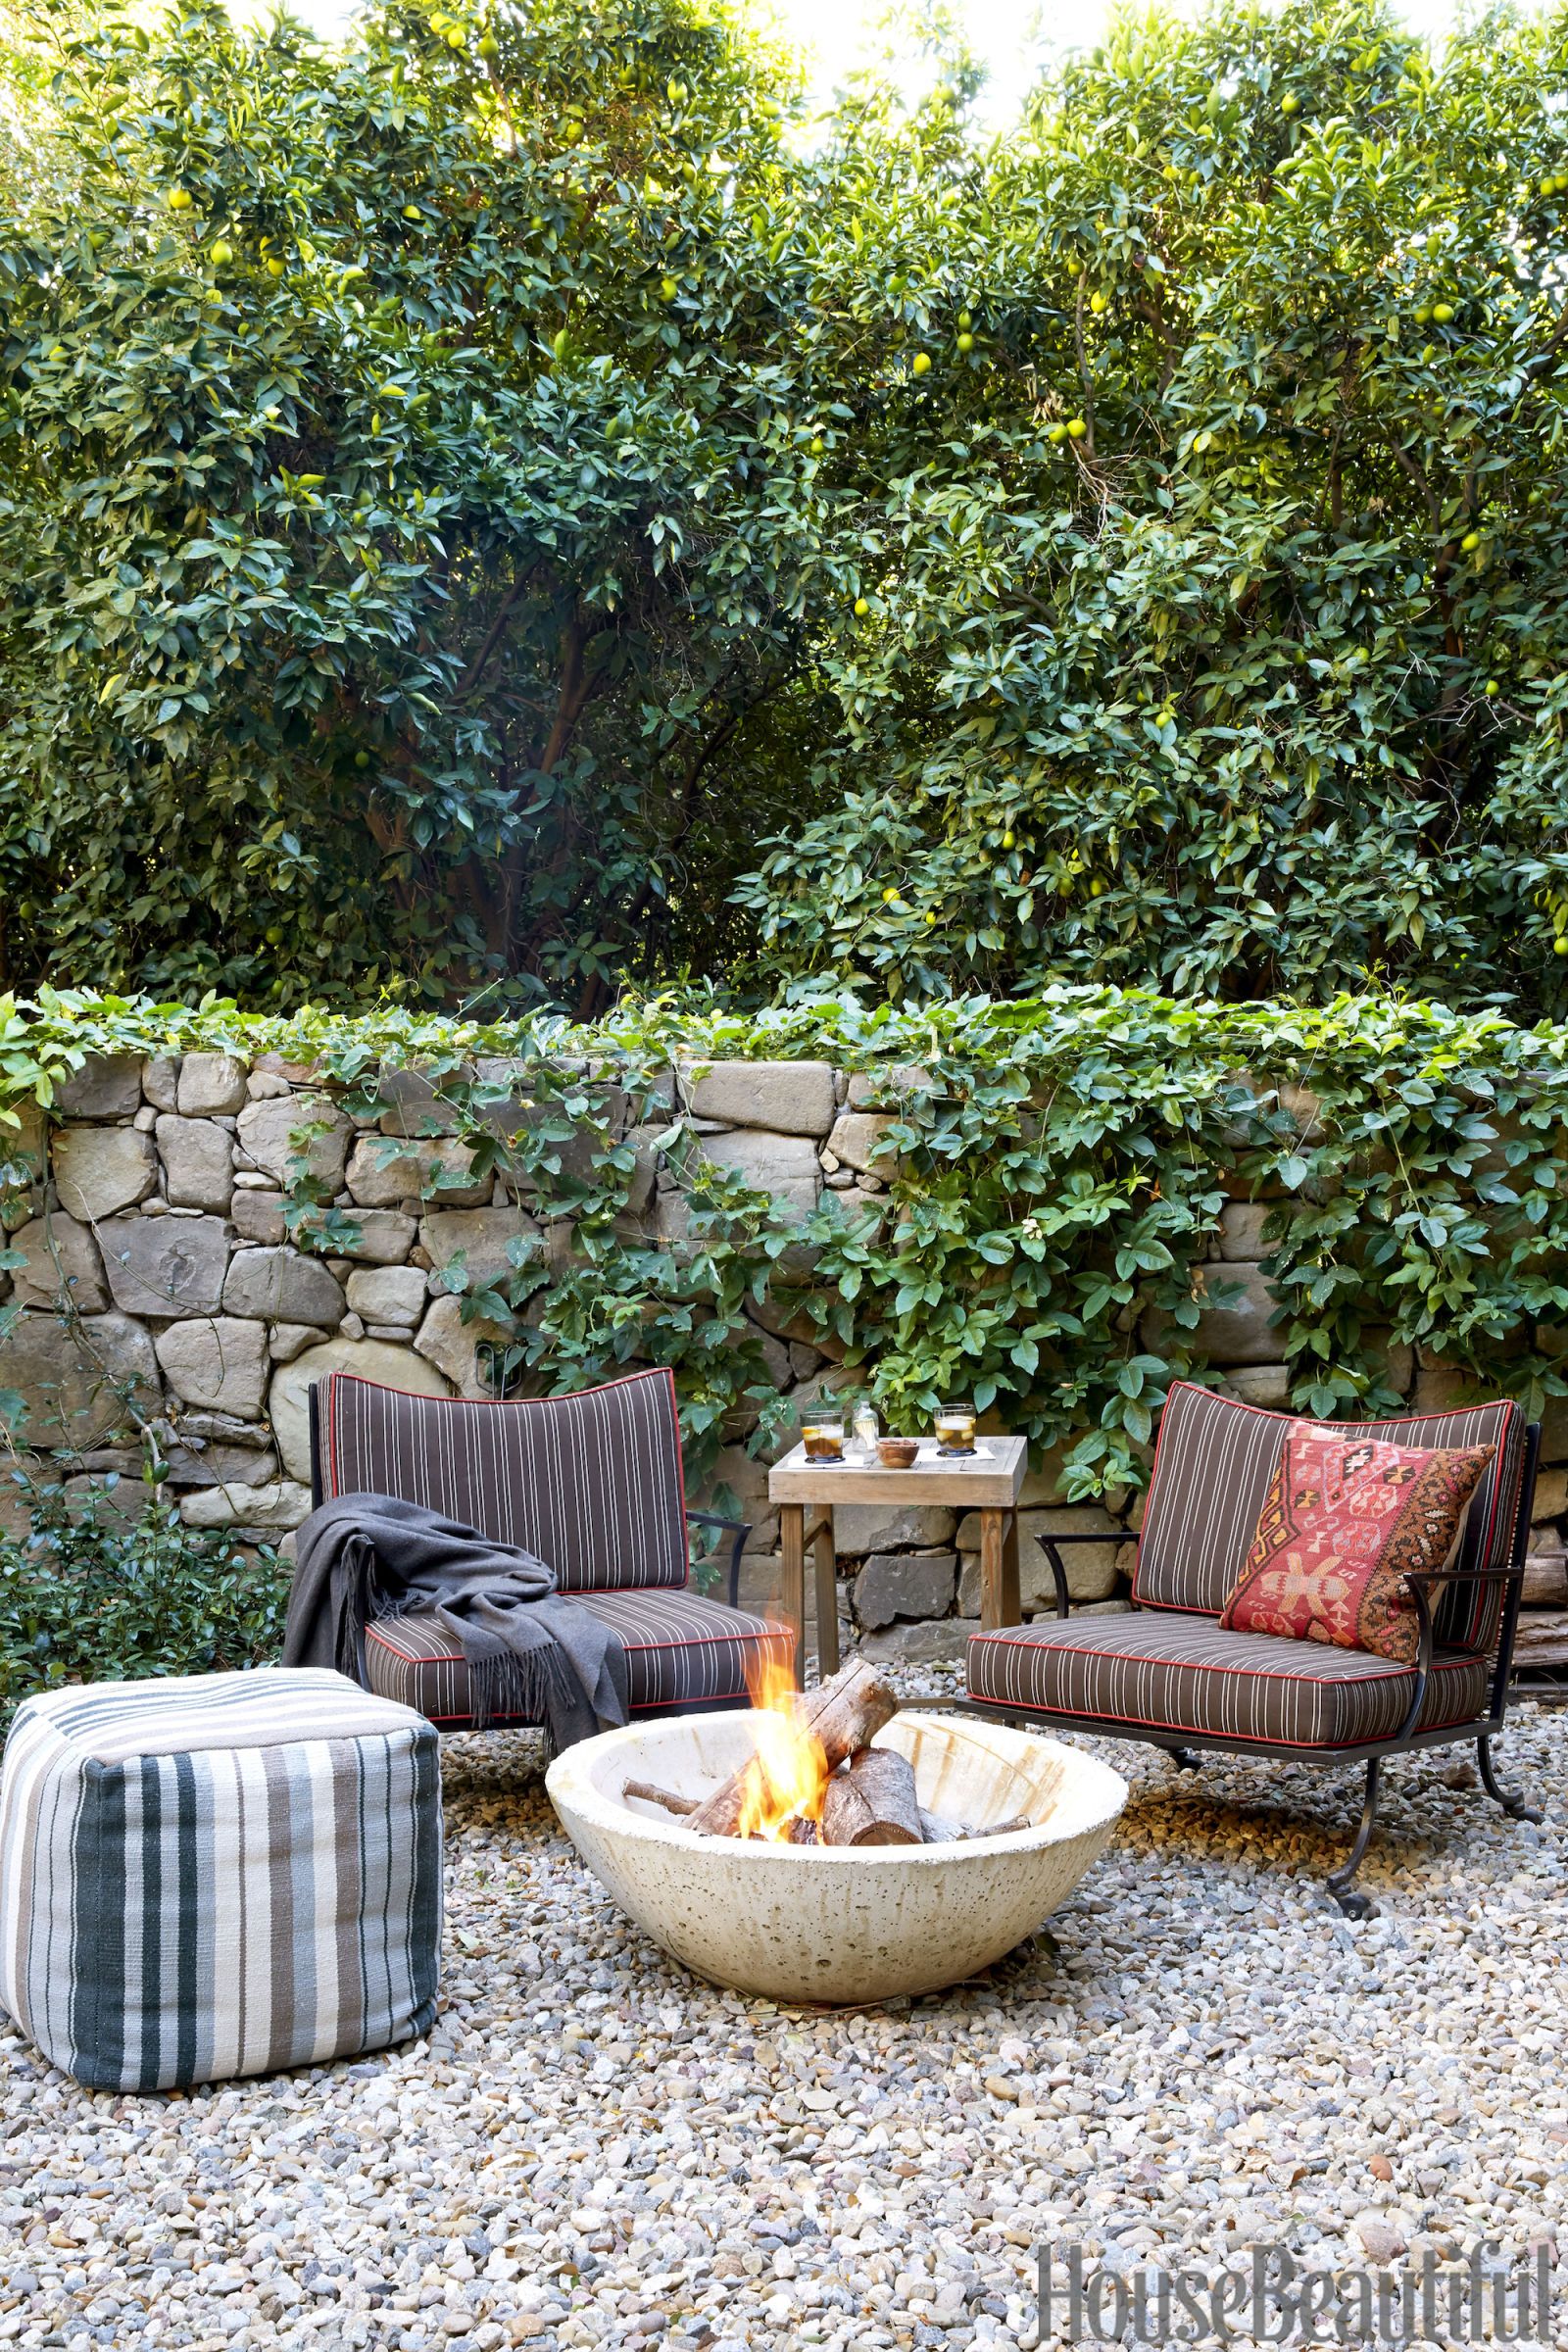 10 Fire Pits That Make Fall Evenings, Fire Pit Decor